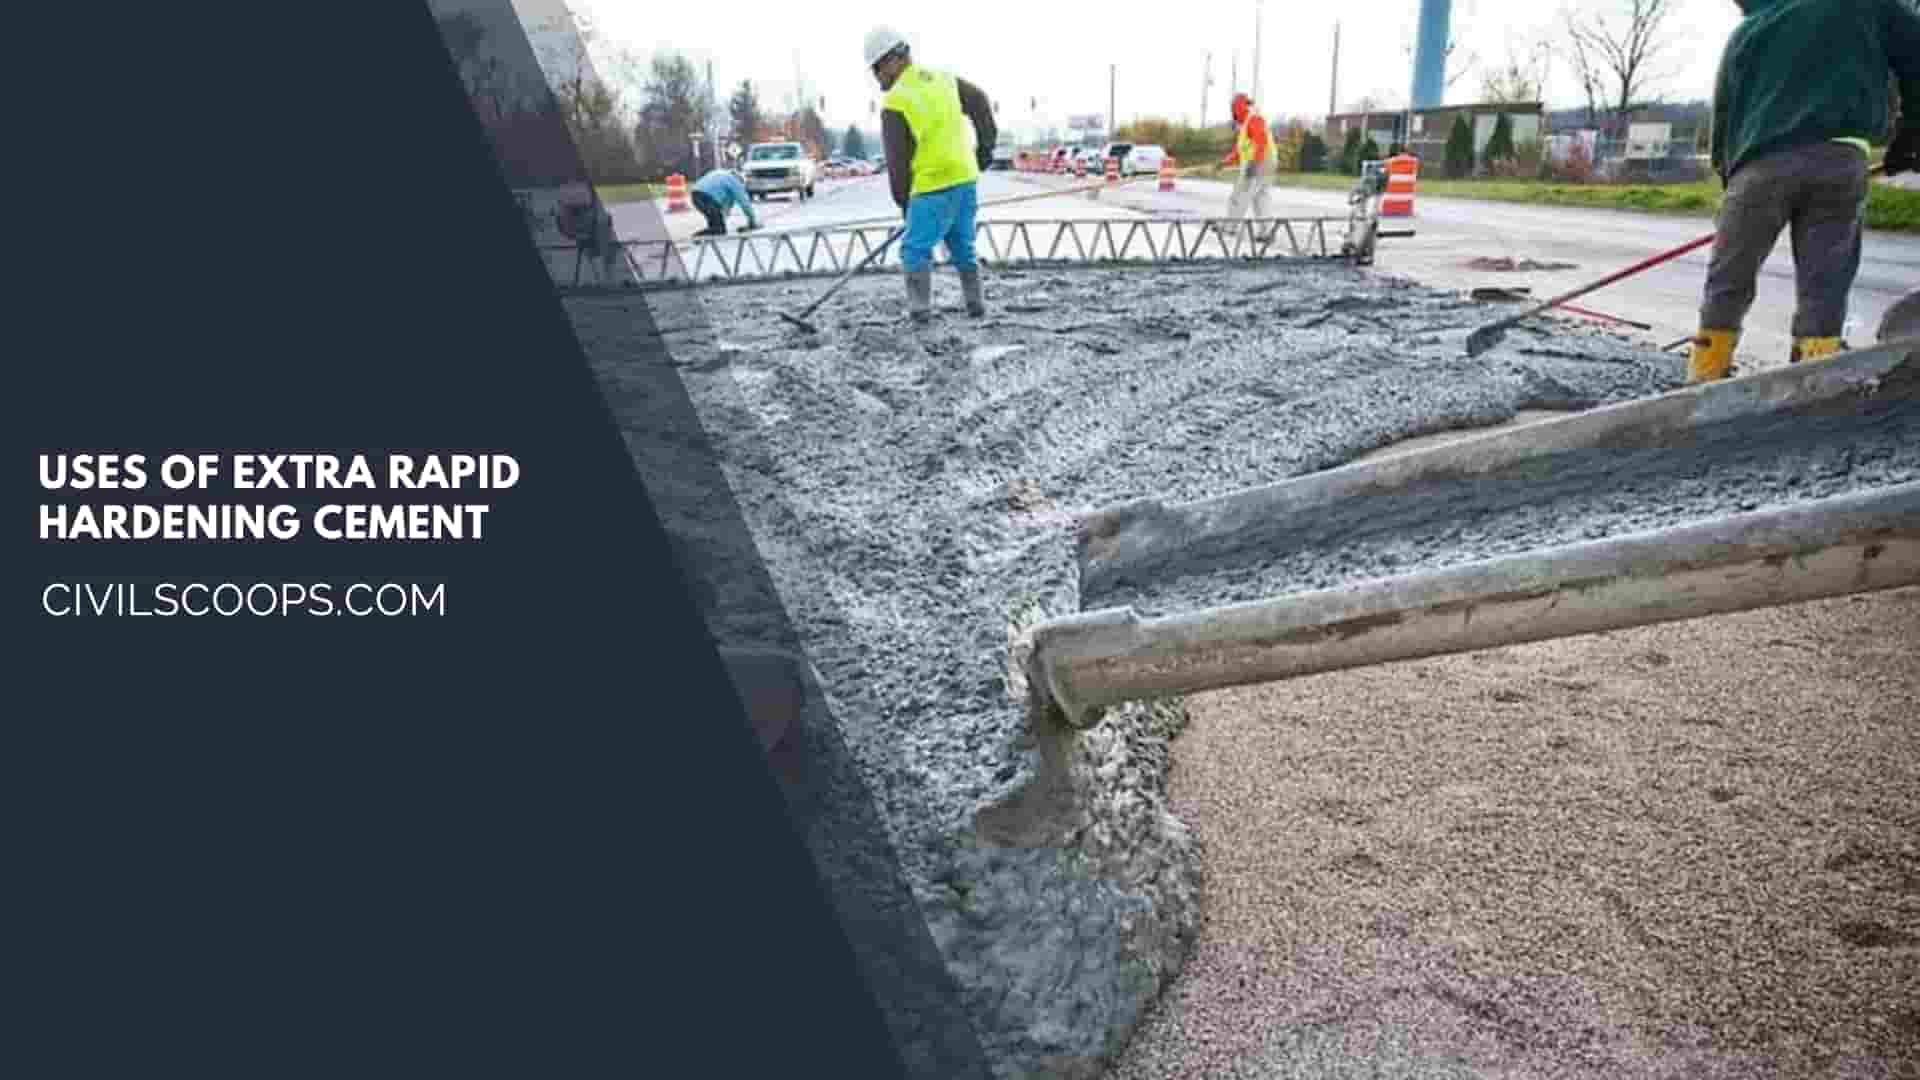 Uses of Extra Rapid Hardening Cement